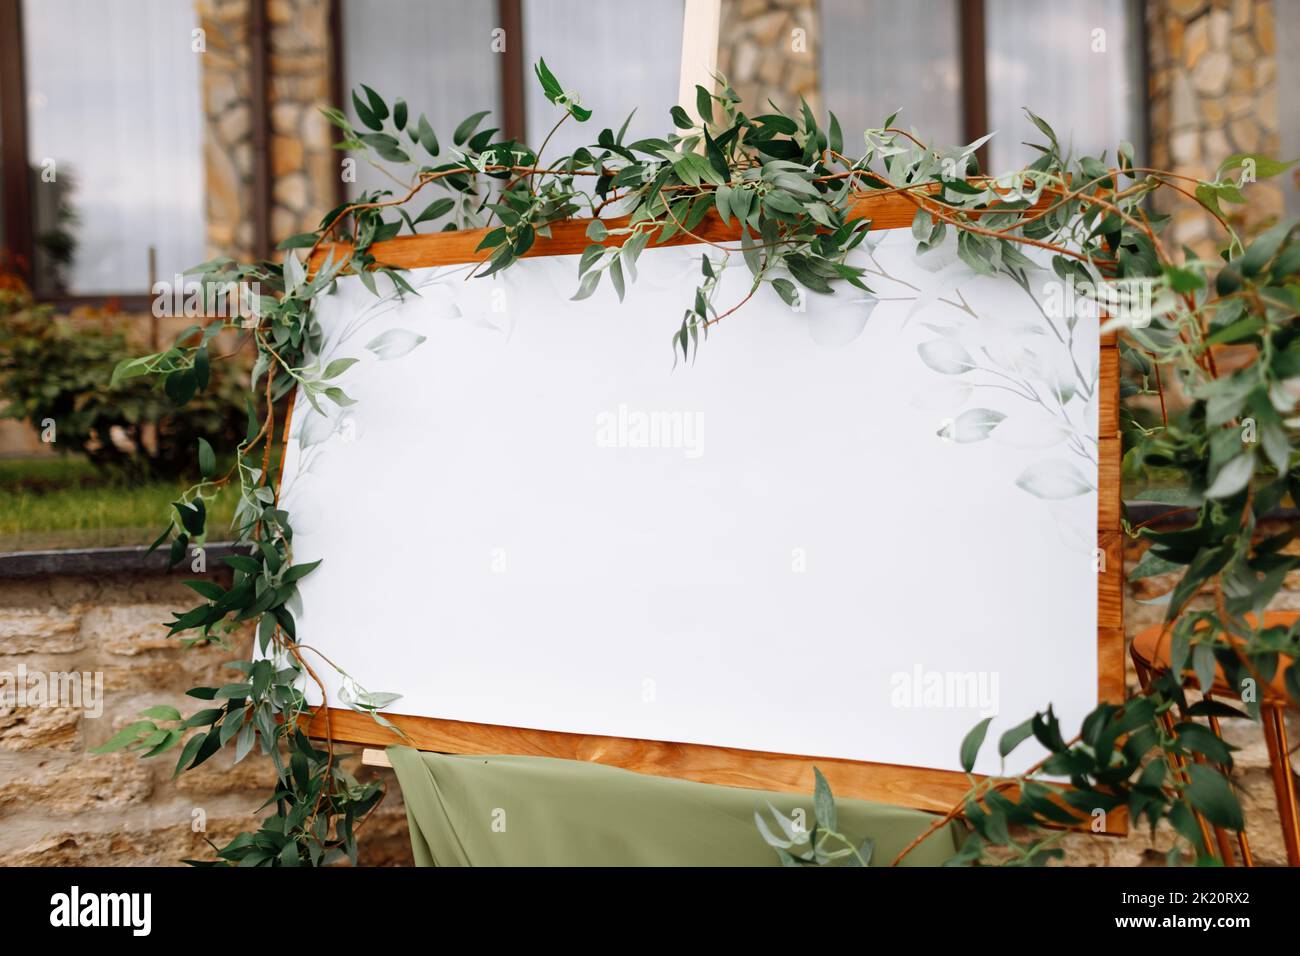 Wedding wooden board, mockup, invitation easel, with white space for an inscription, decorated with fresh greenery and green cloth. Wedding frame outd Stock Photo